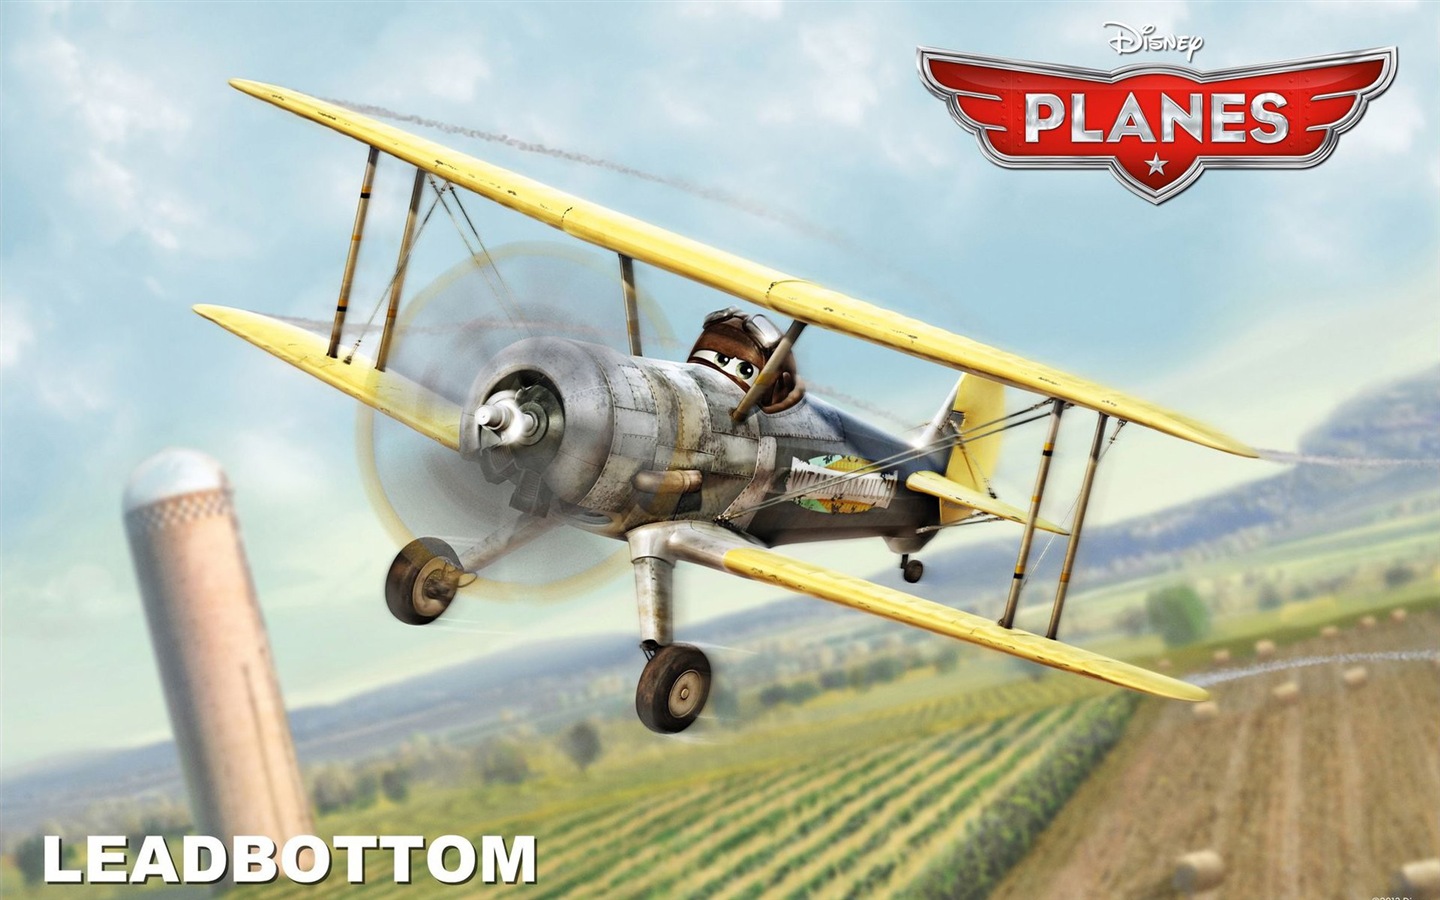 Planes 2013 HD wallpapers #8 - 1440x900